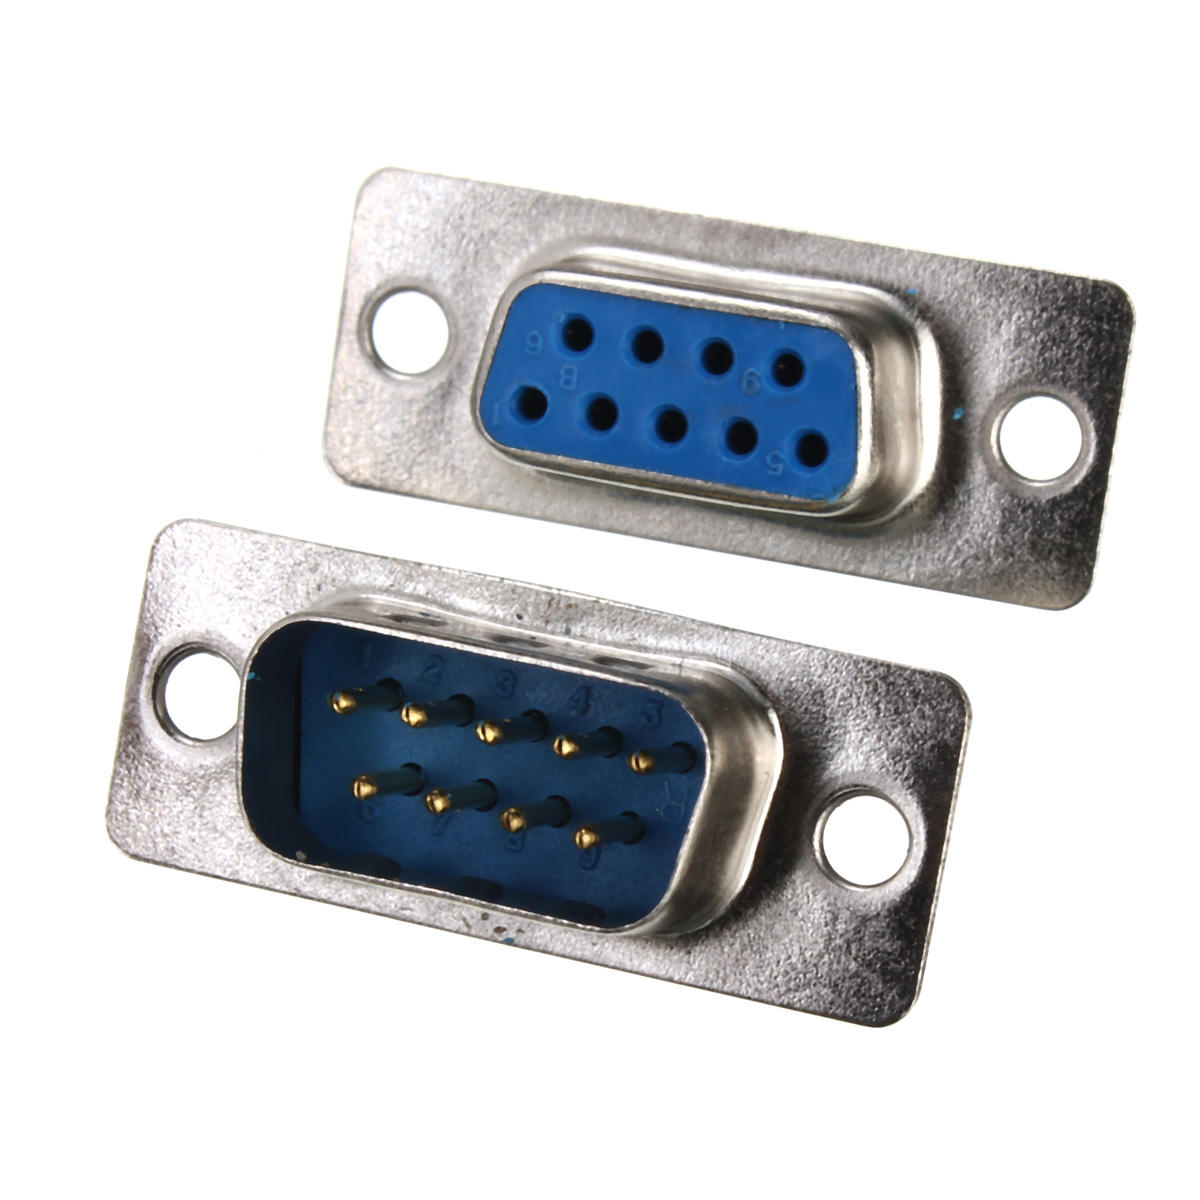 10pcs-rs232-serial-port-9-pin-db9-connector-female-male-solder